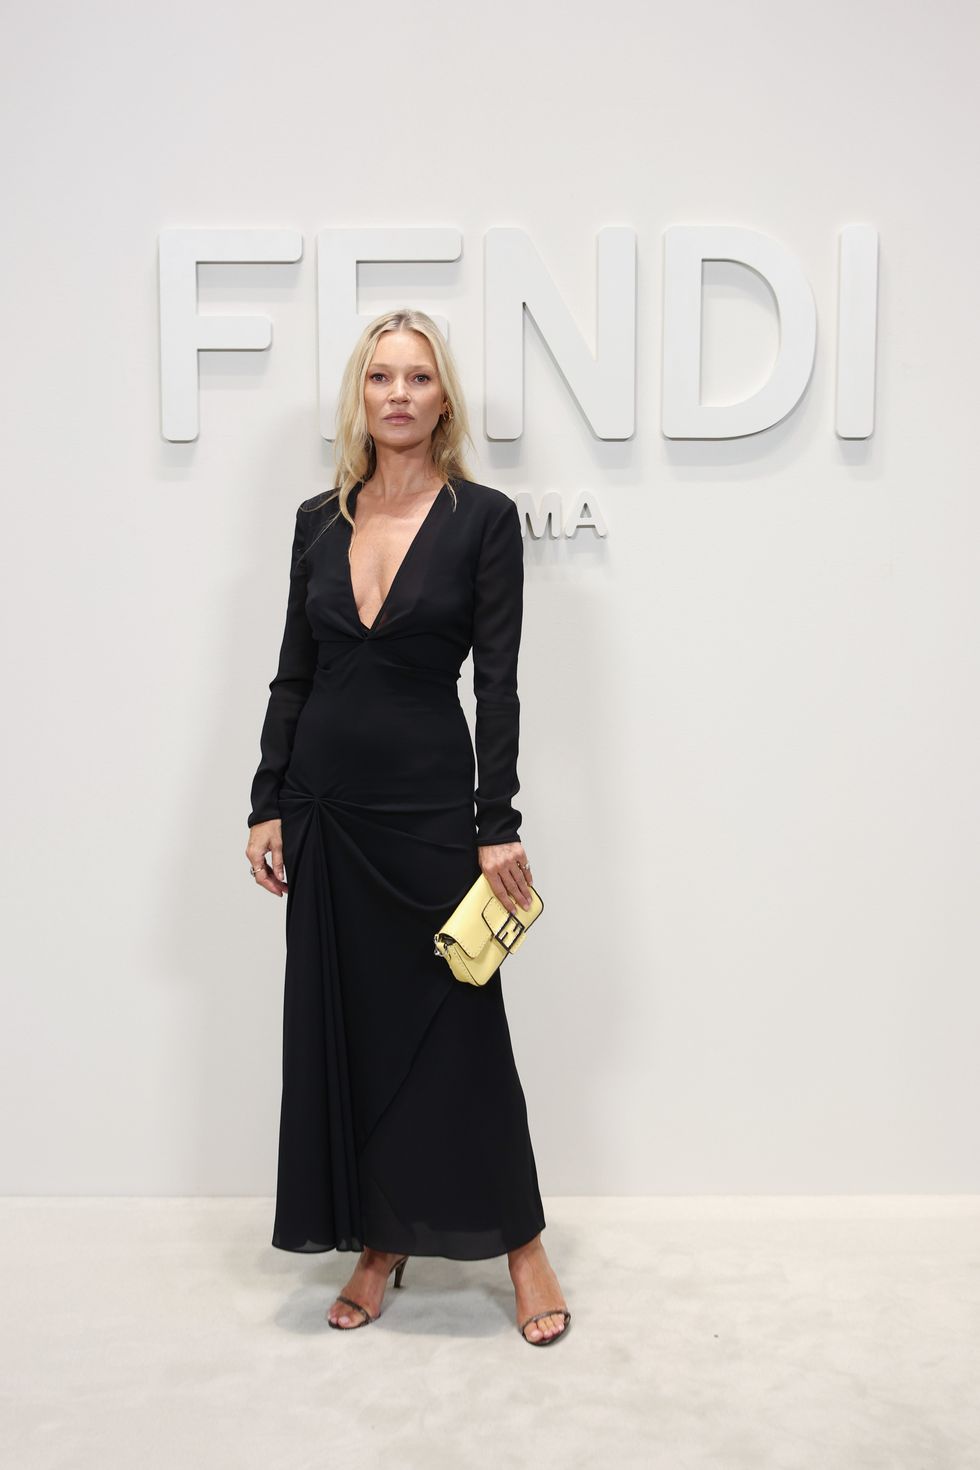 milan, italy september 20 kate moss attends the fendi spring summer 2024 fashion show on september 20, 2023 in milan, italy photo by daniele venturelligetty images for fendi